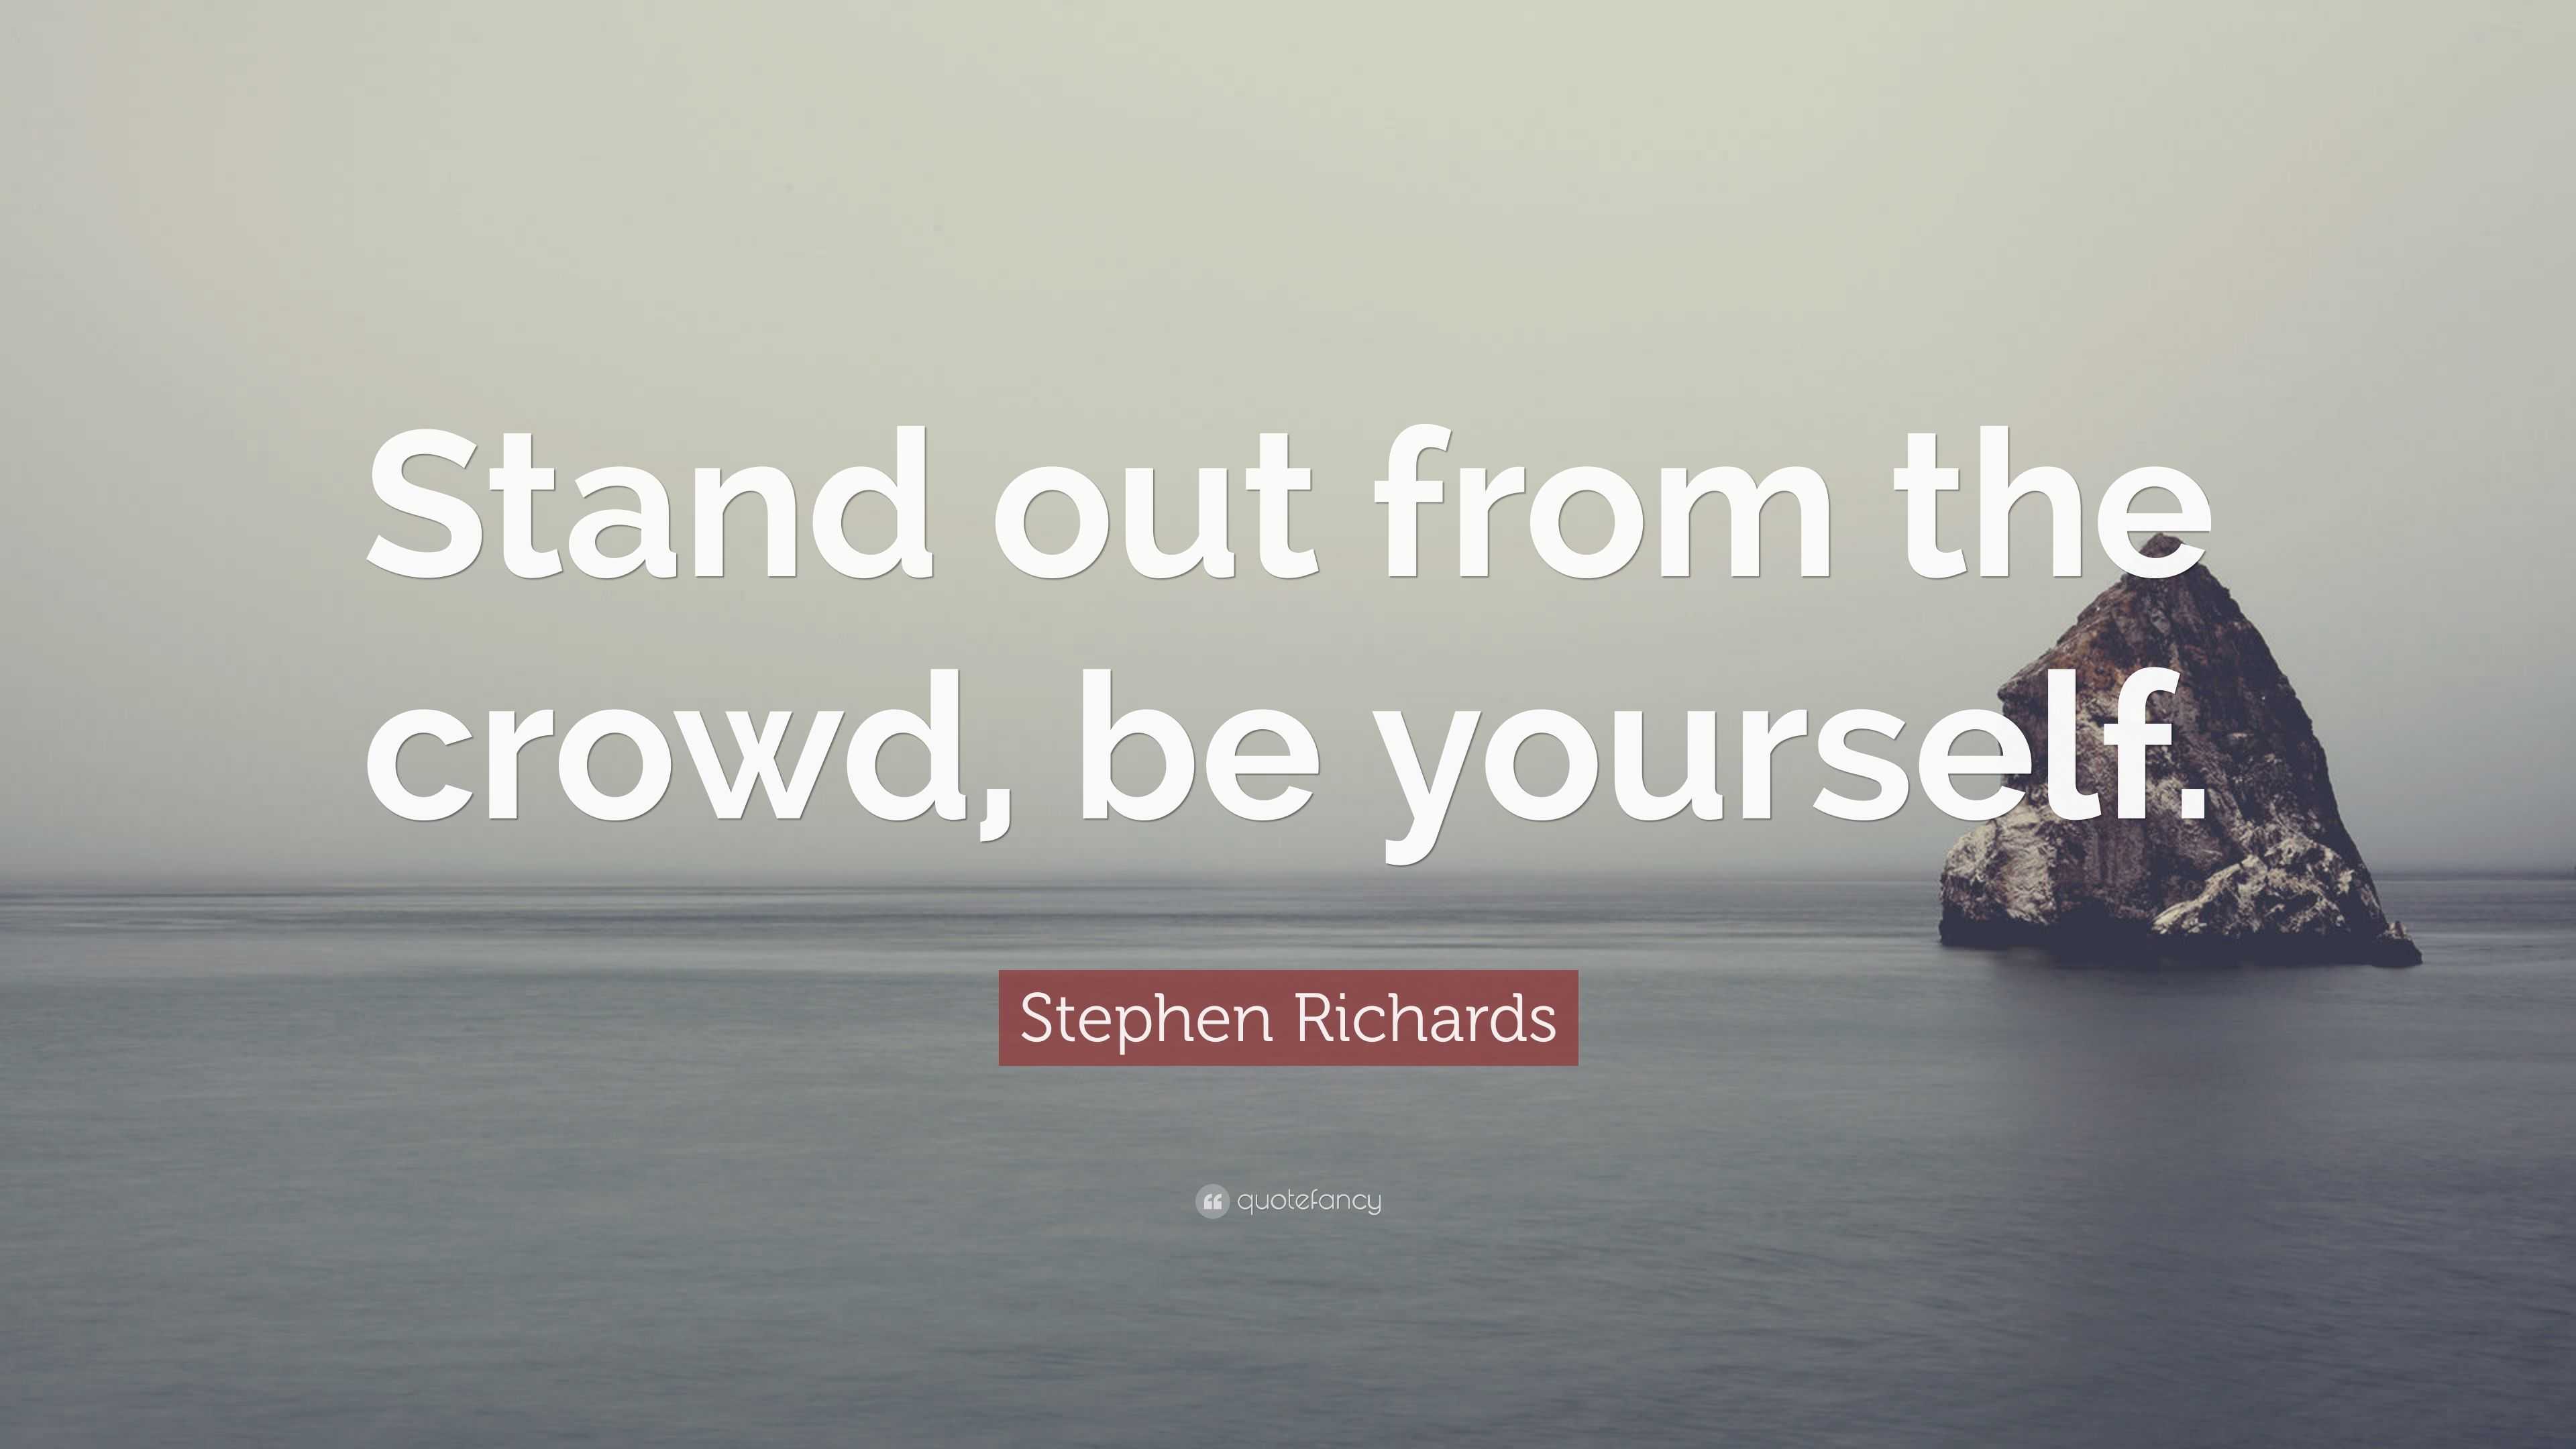 Stephen Richards Quote: “Stand out from the crowd, be yourself.”